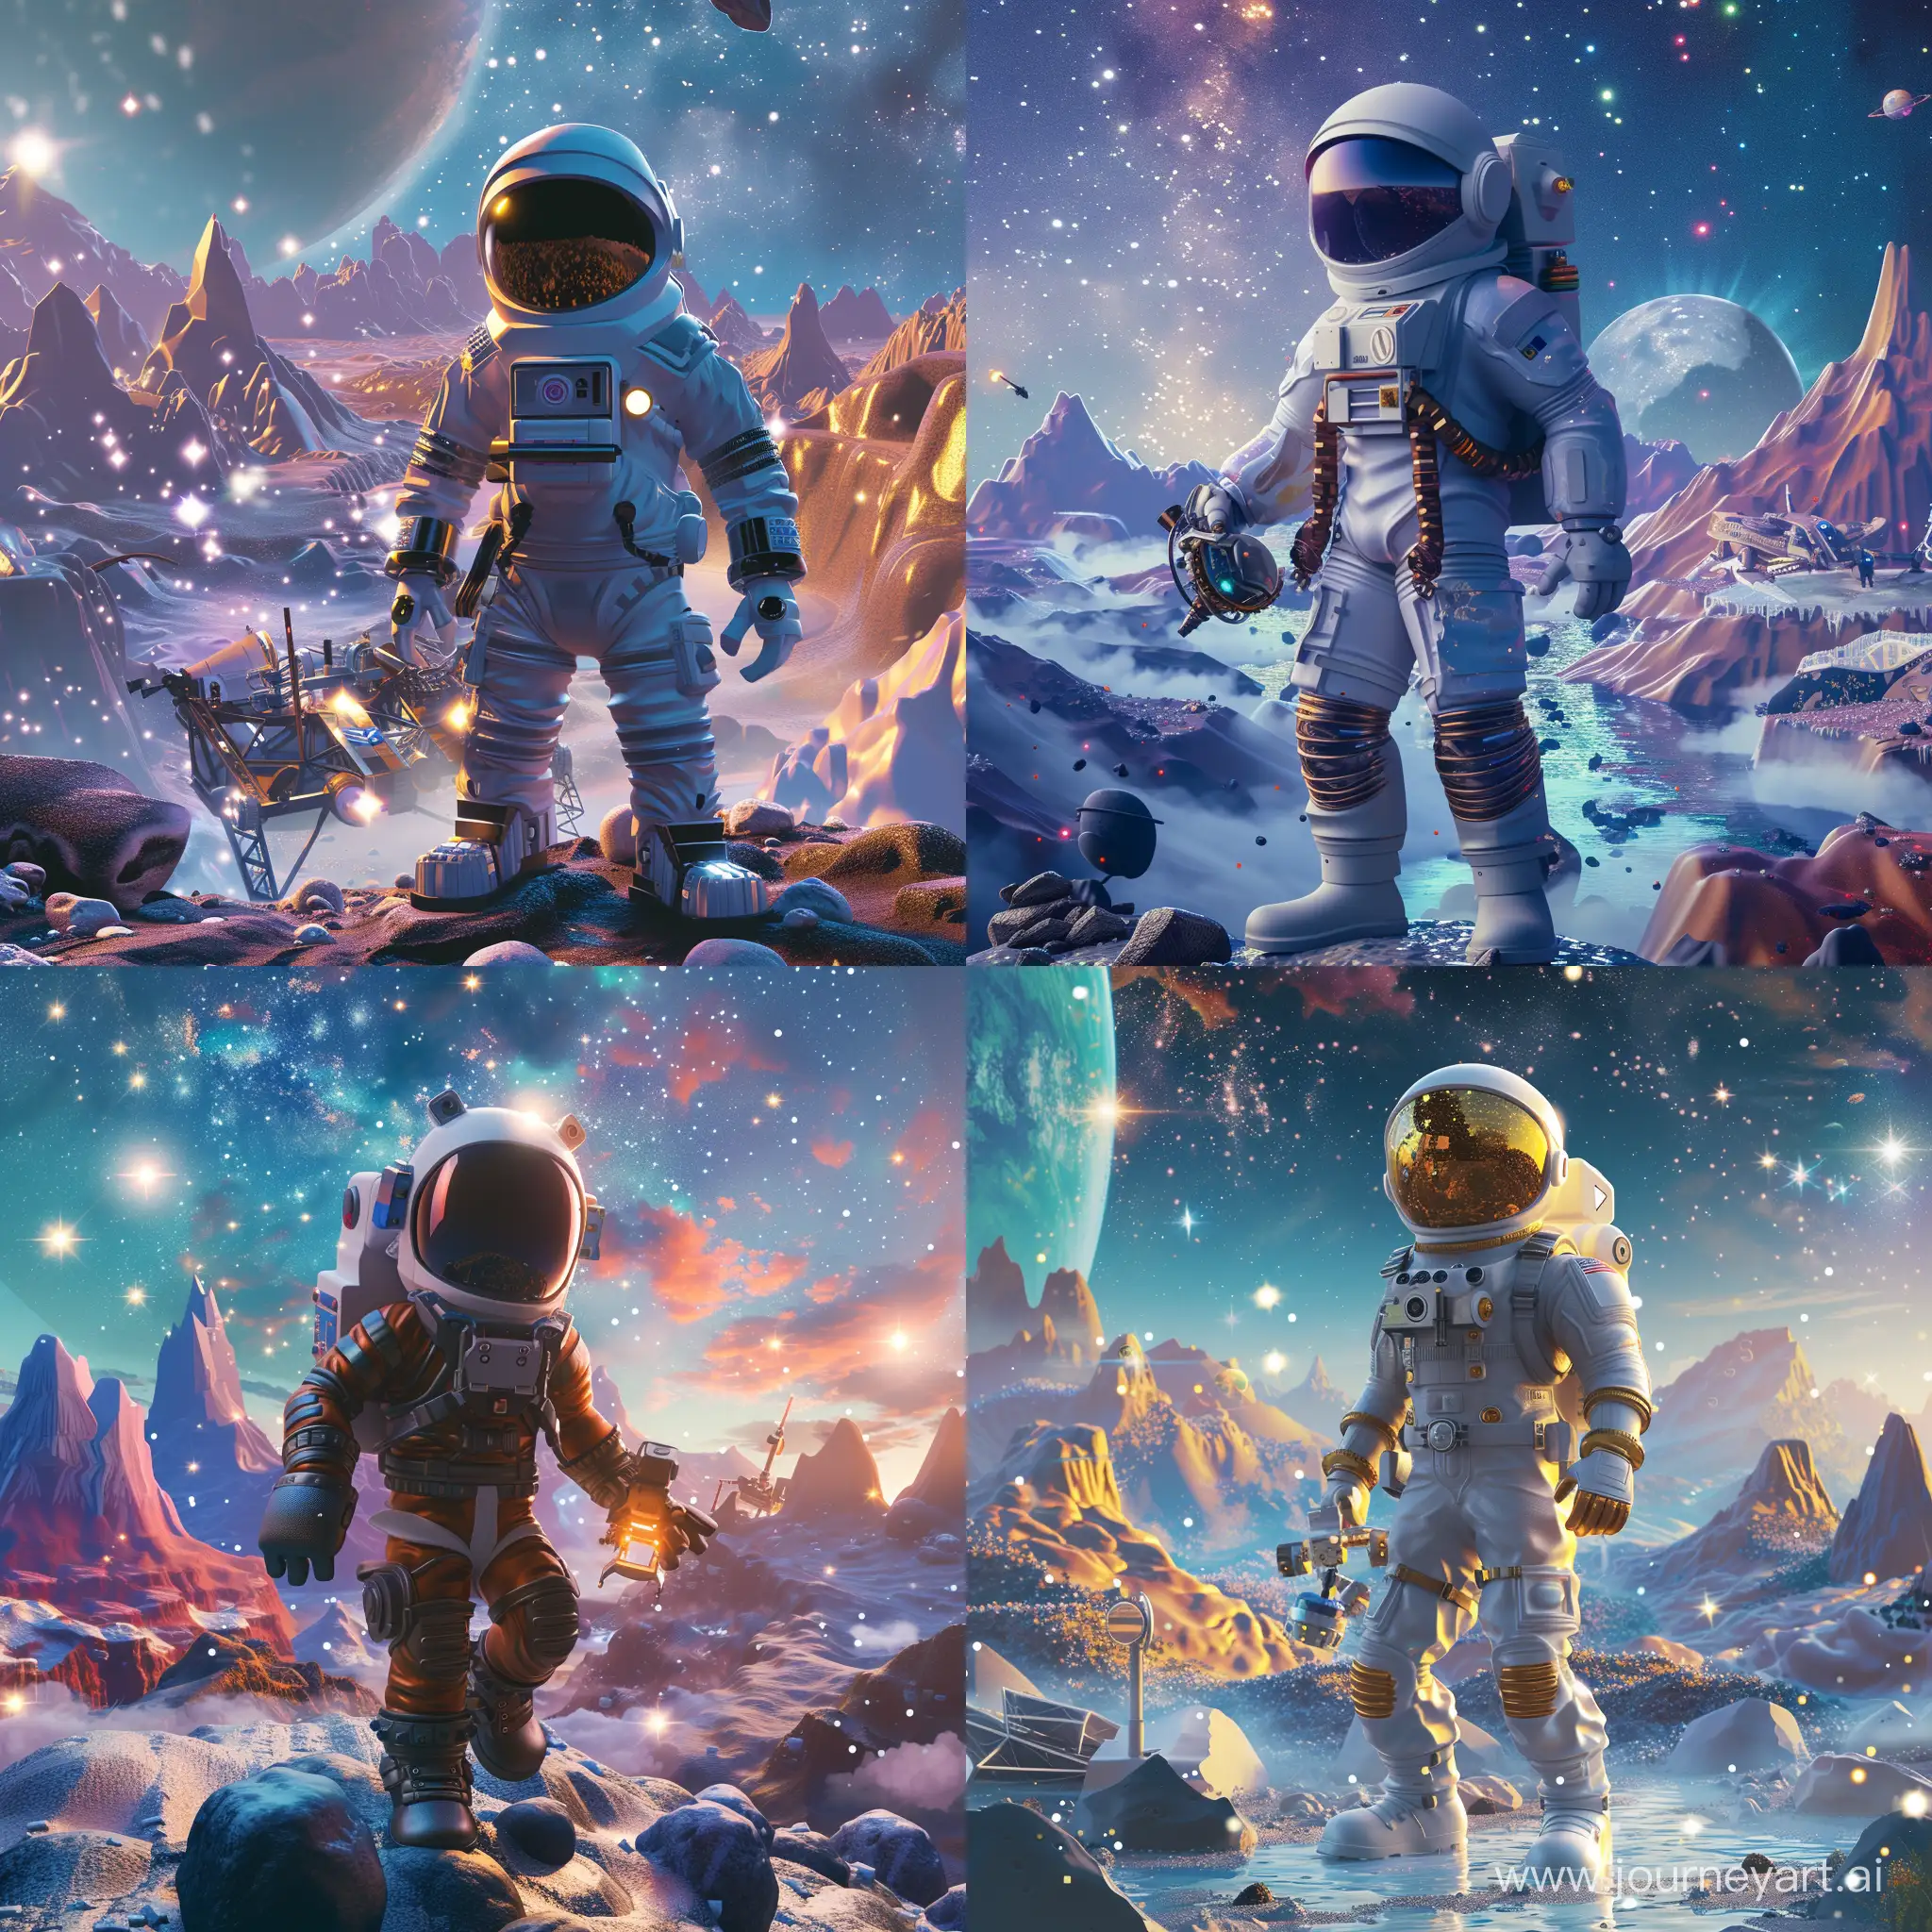 An astronaut in a futuristic space suit standing on the surface of another planet in the world of Roblox. The backdrop should be filled with fantastic landscapes, incredible mountains and sparkling stars in the sky. The astronaut may be holding a futuristic instrument or standing next to a spaceship. Be sure to bring in elements specific to Roblox to convey the atmosphere of the game platform